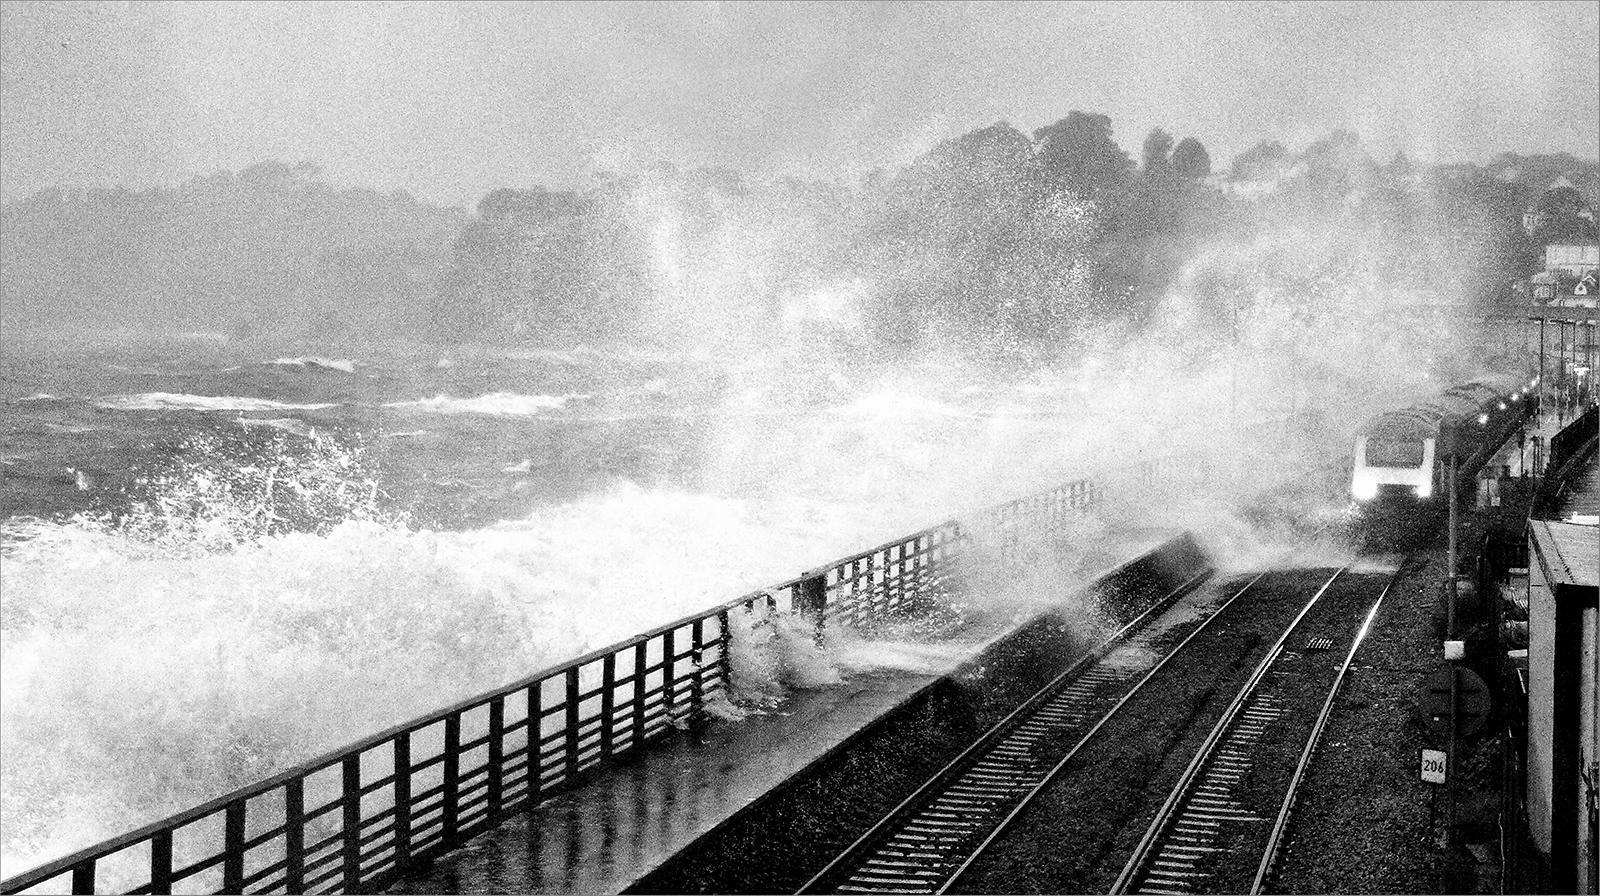 Waves on the rails